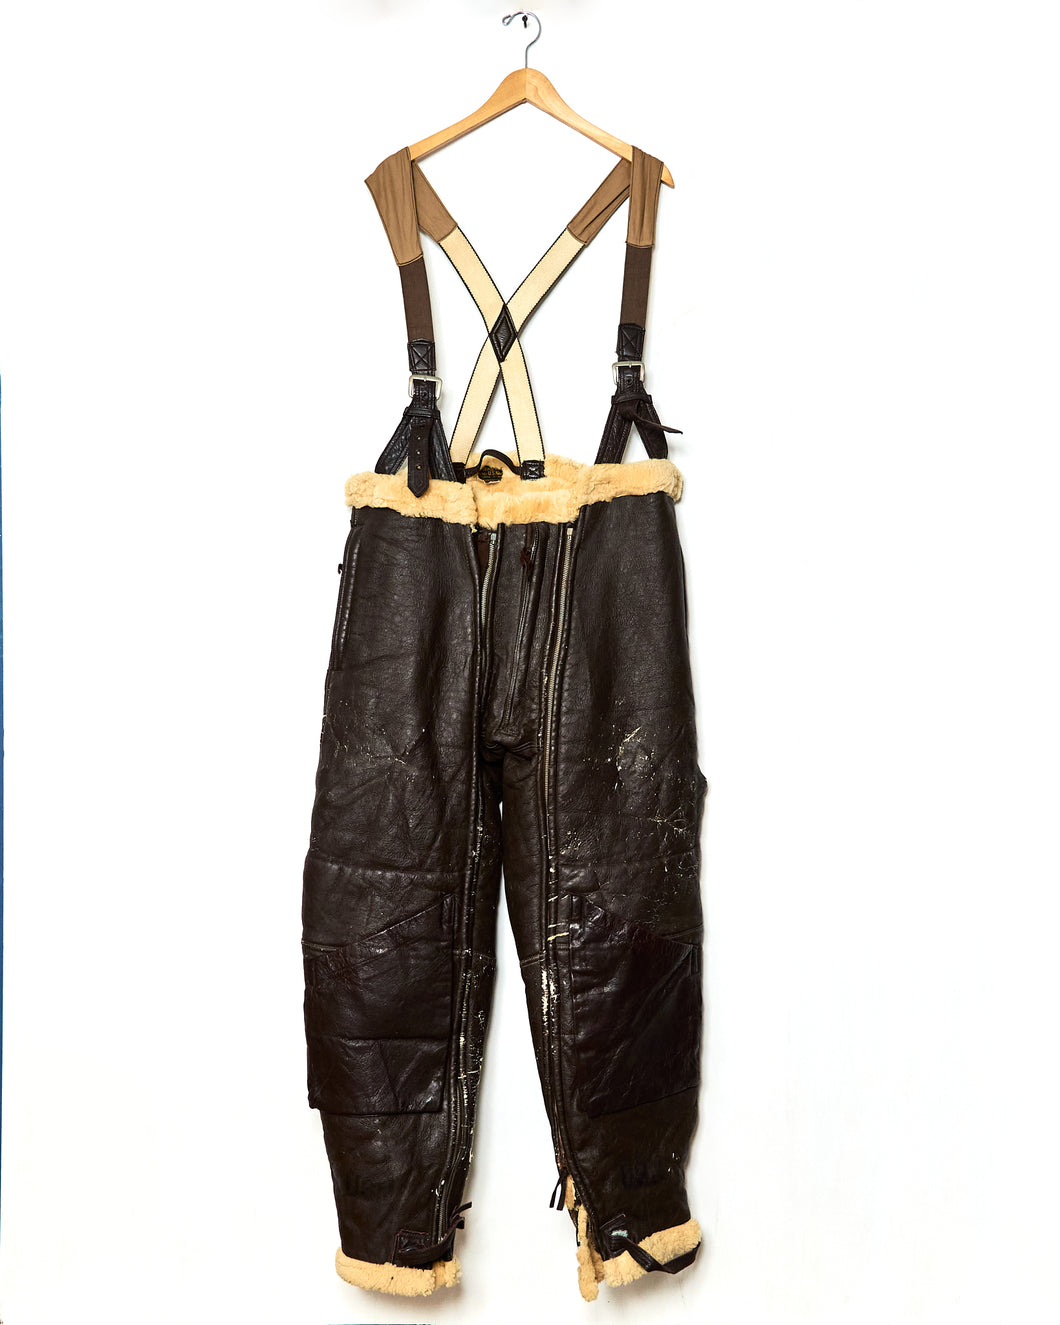 1930s/40s WW2 USAAF Type A-3 Flying Trousers